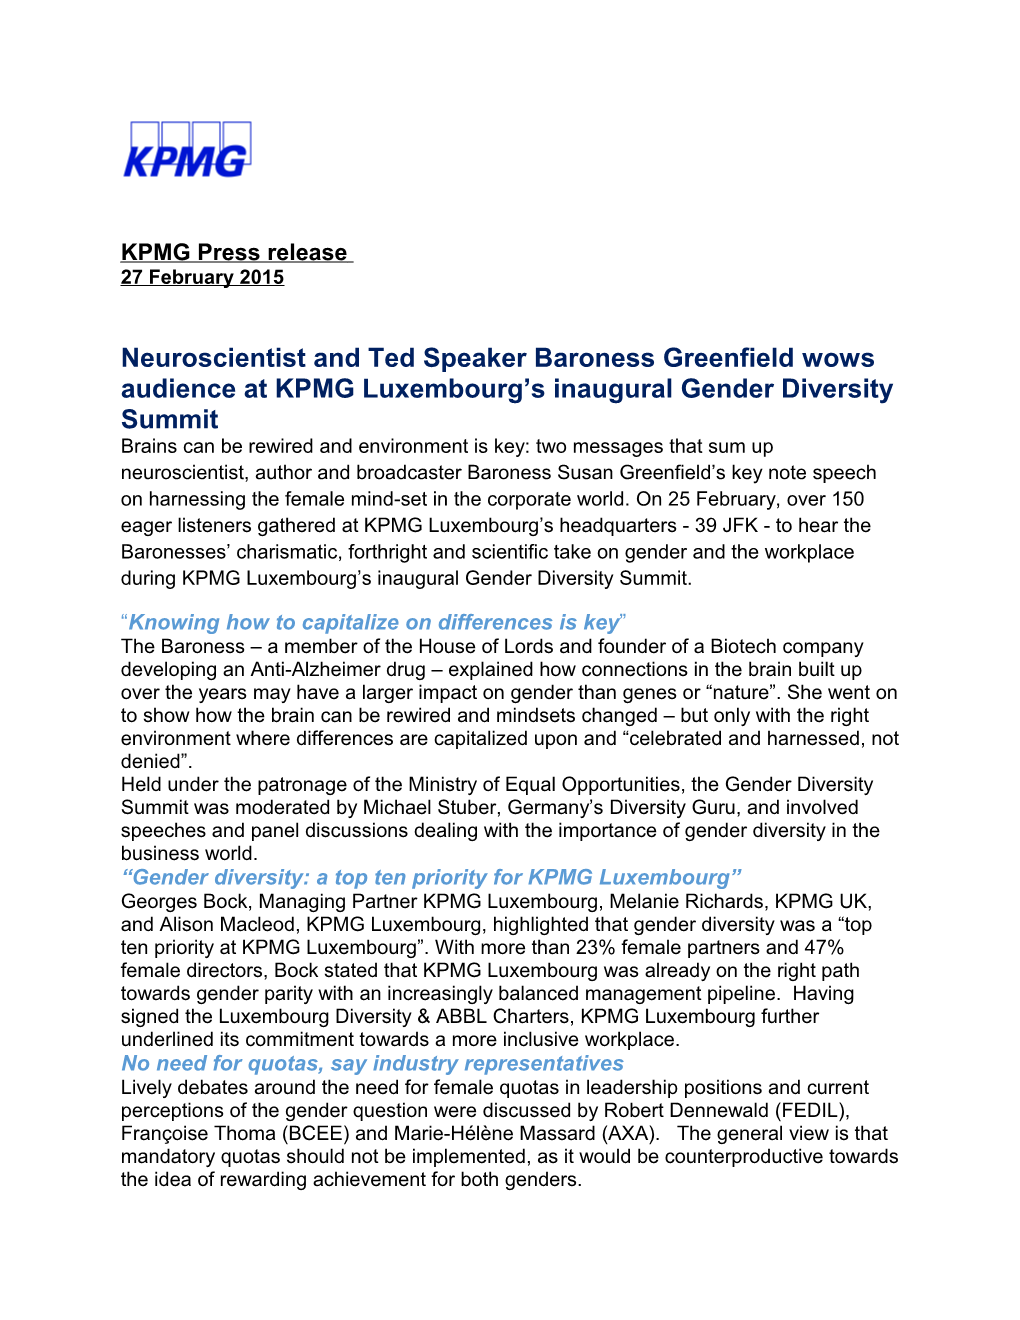 Neuroscientist and Ted Speaker Baroness Greenfield Wowsaudience at KPMG Luxembourg S Inaugural